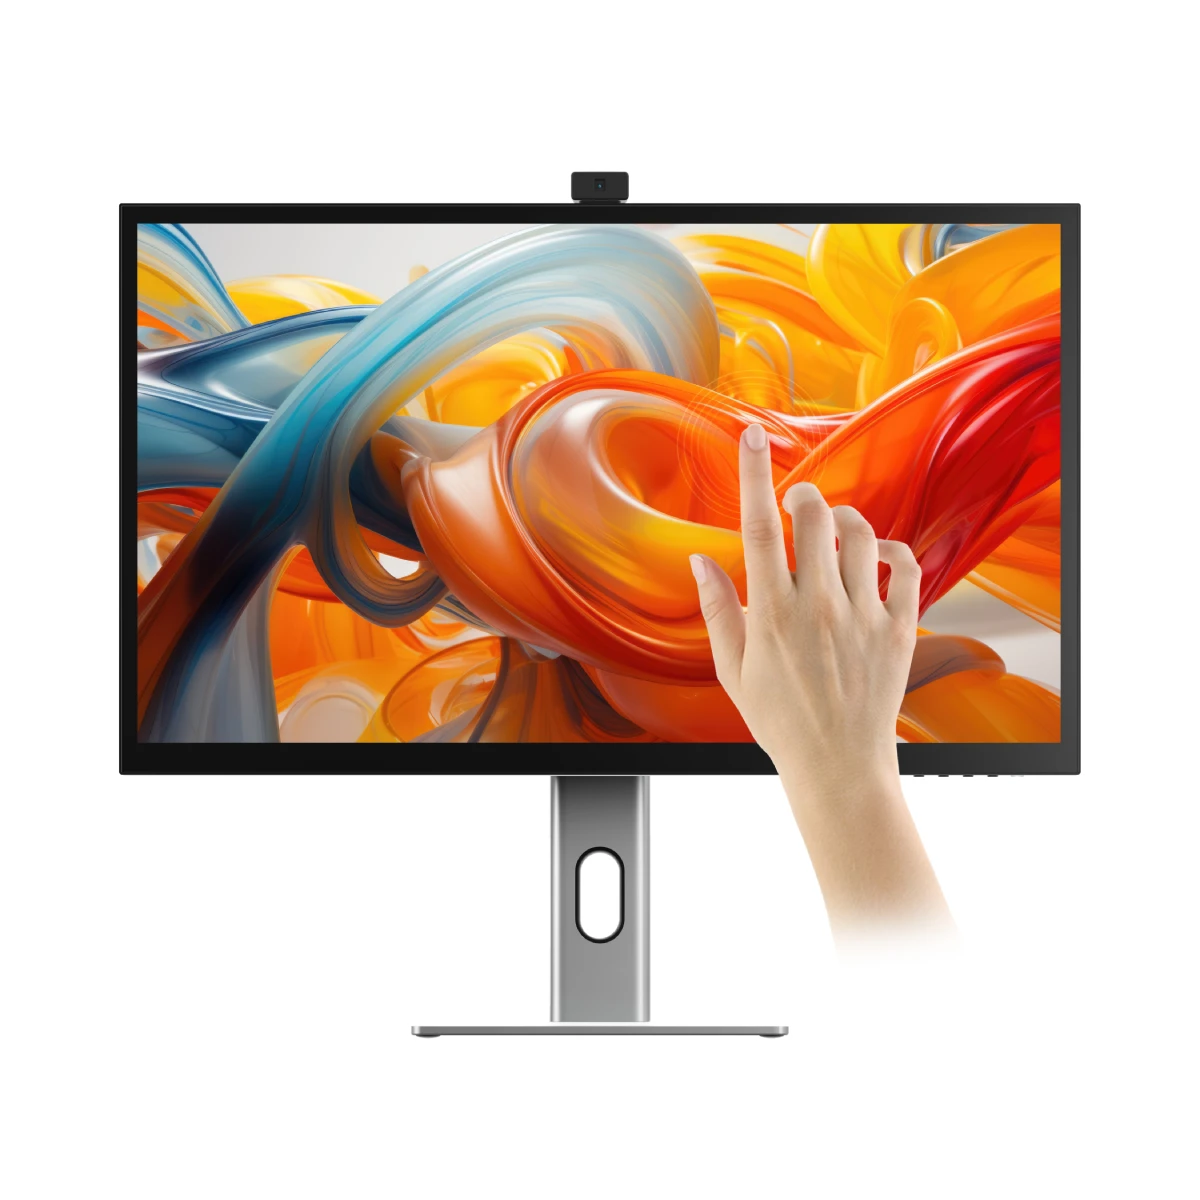 clarity-pro-touch-27-uhd-4k-monitor-with-65w-pd-webcam-and-touchscreen-thunderbolt-4-blaze-docking-station2